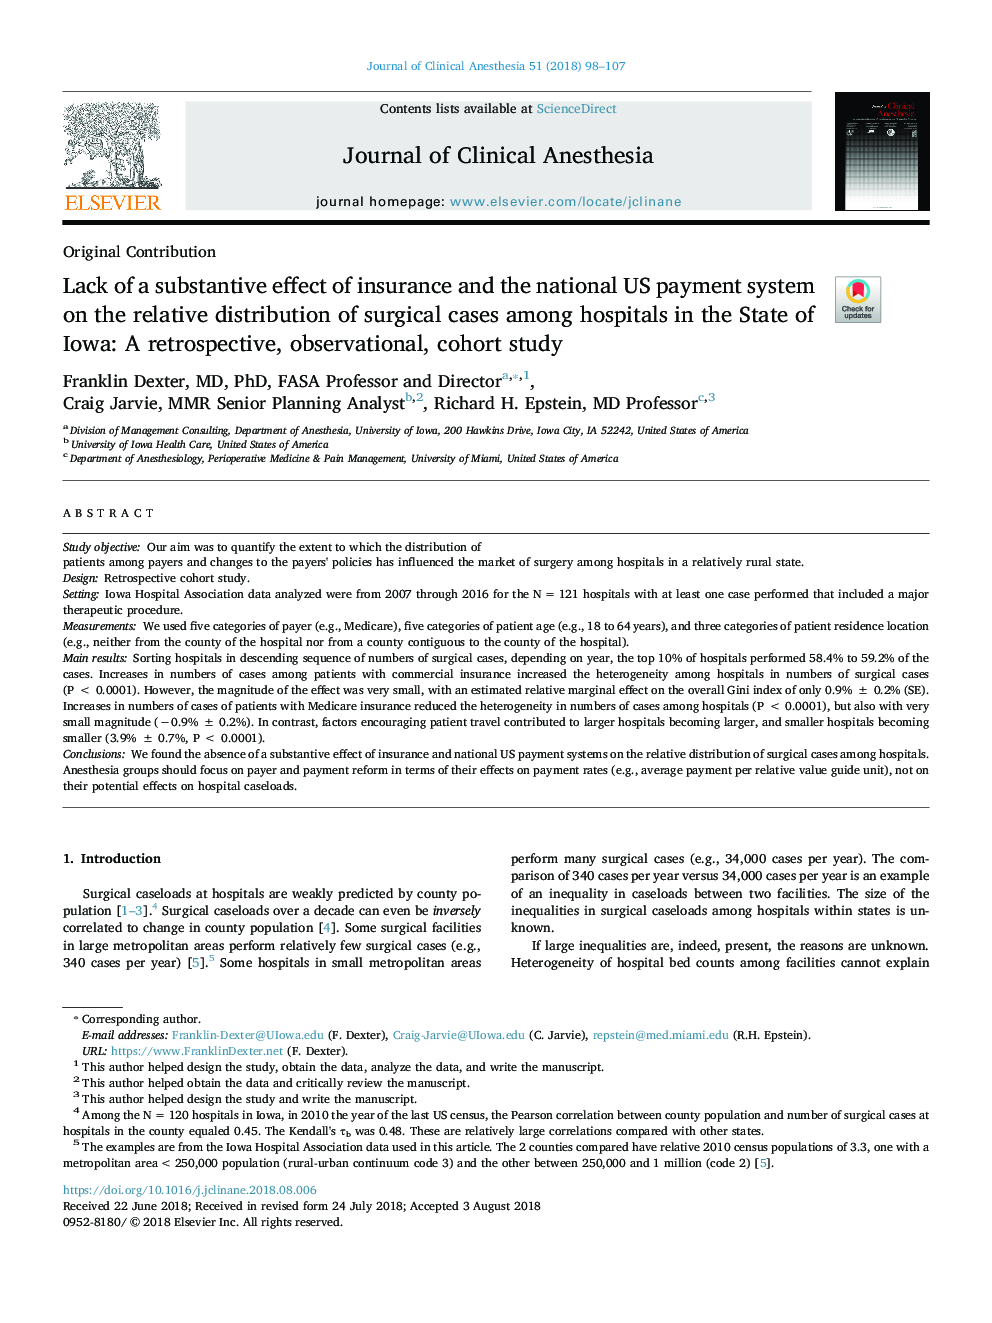 Lack of a substantive effect of insurance and the national US payment system on the relative distribution of surgical cases among hospitals in the State of Iowa: A retrospective, observational, cohort study